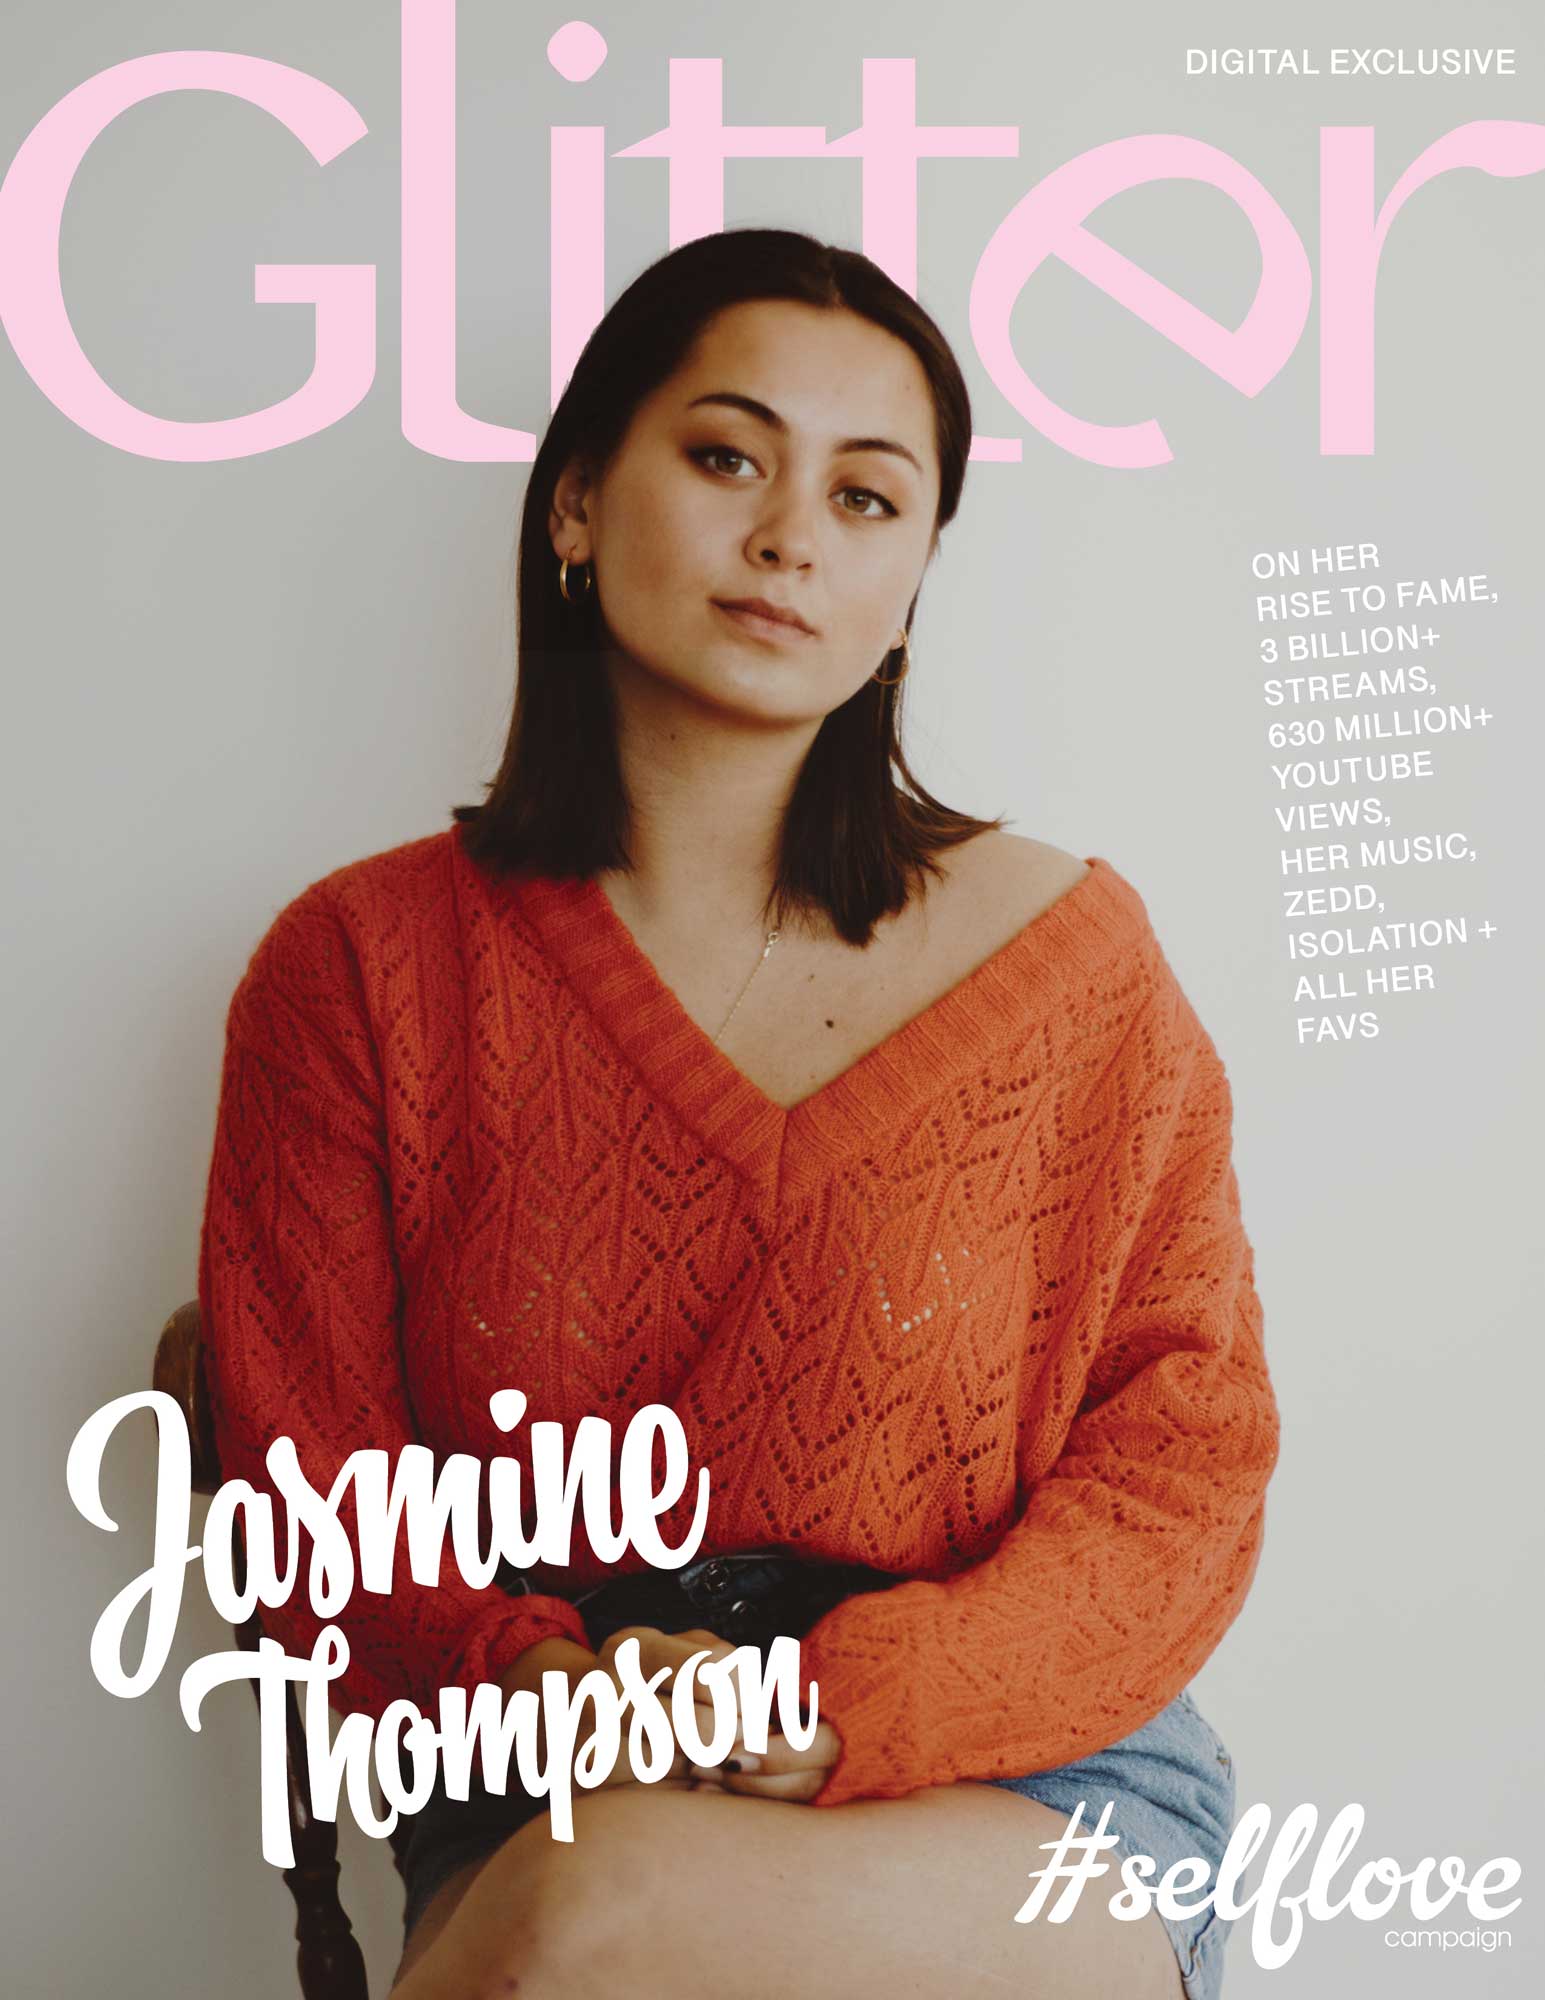 Digital Exclusive Cover: Jasmine Thompson, On Her Rise to Fame, 3B+  Streams, 630M+ YouTube Views, Her Music, Zedd, Isolation + All Her Favs |  Glitter Magazine